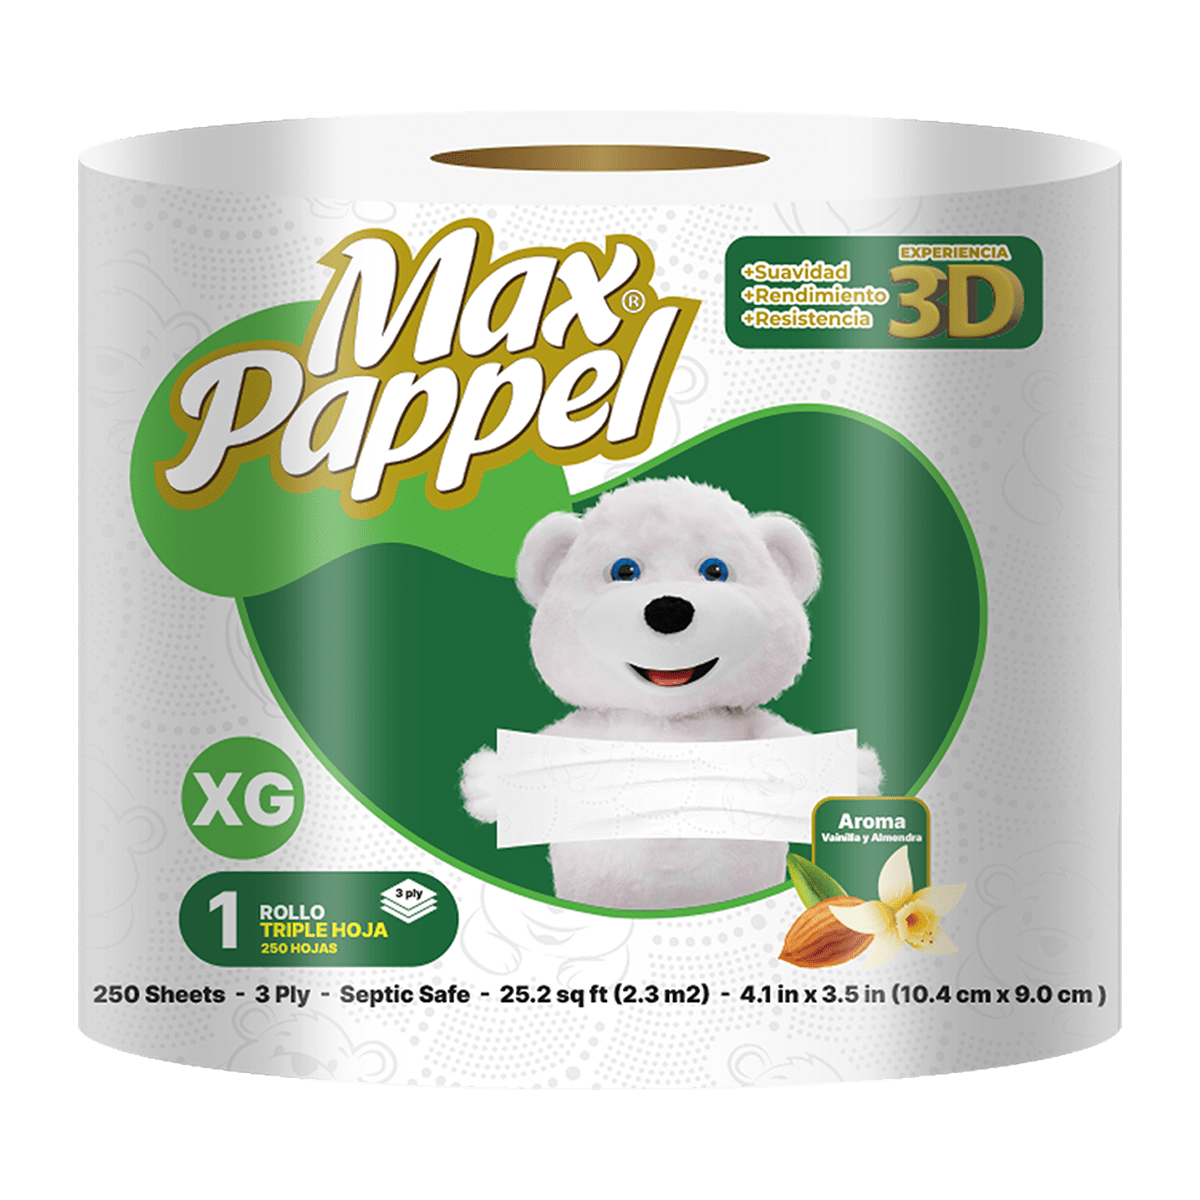 Two Ply Green<br> 24 Packs x 1 Roll